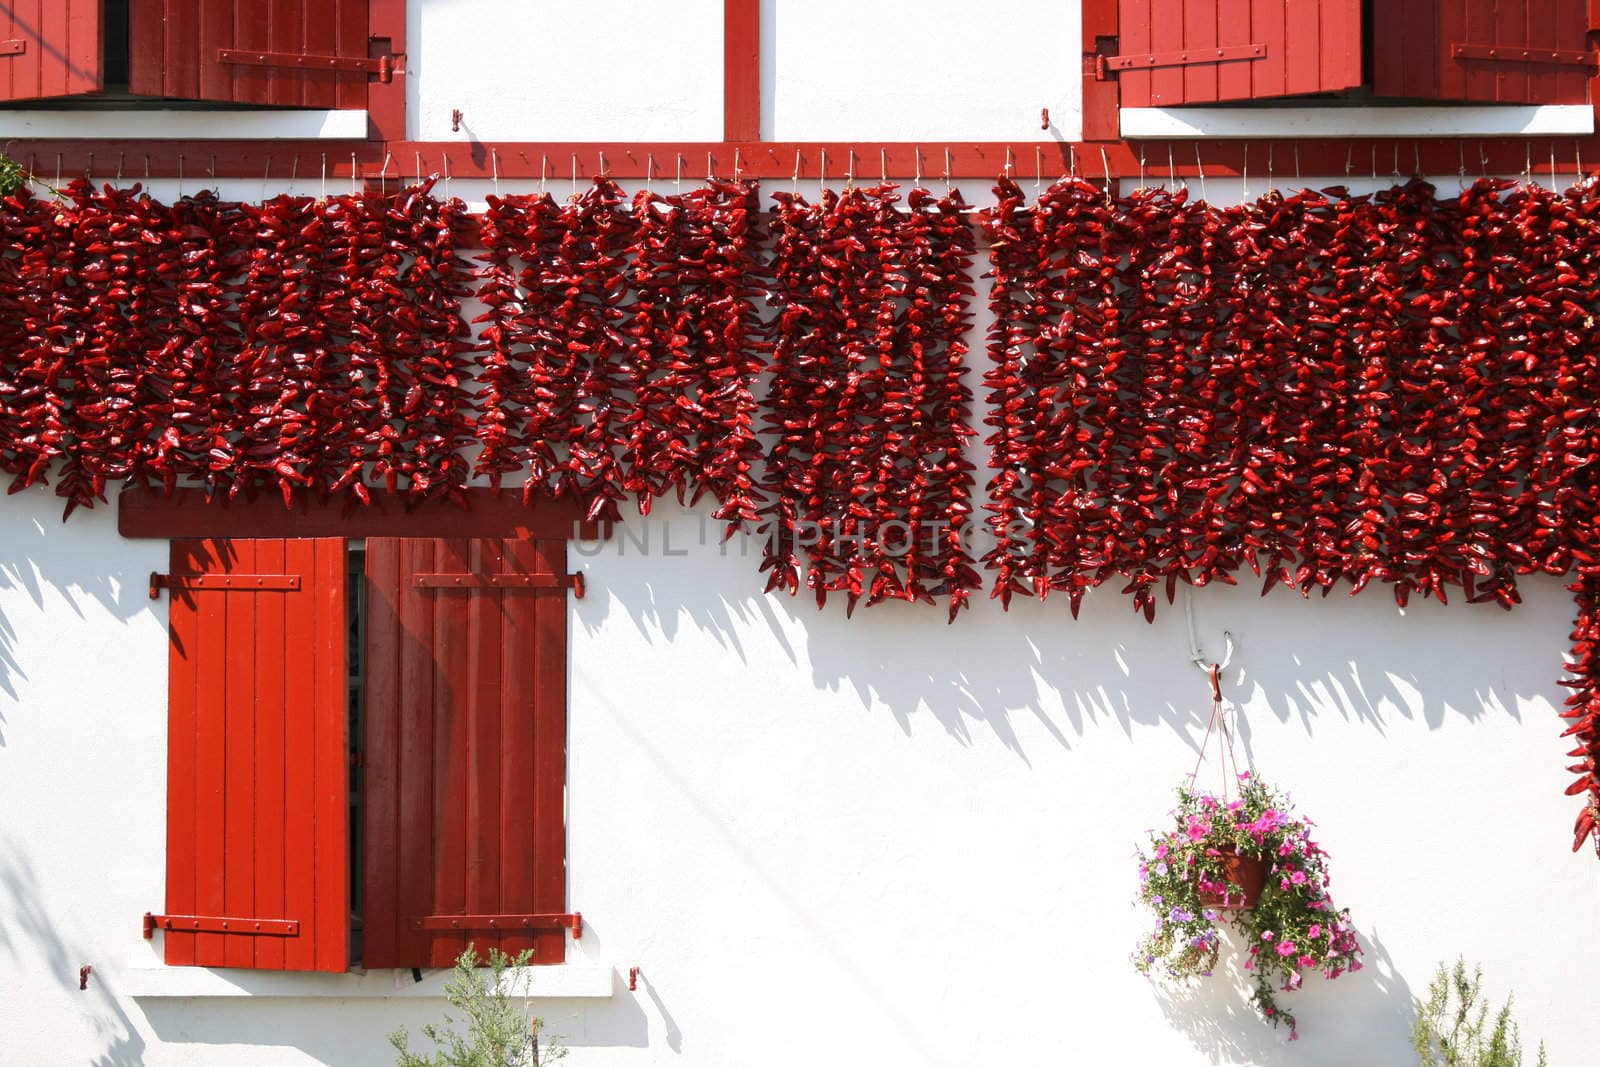 drying peppers bunches by daboost